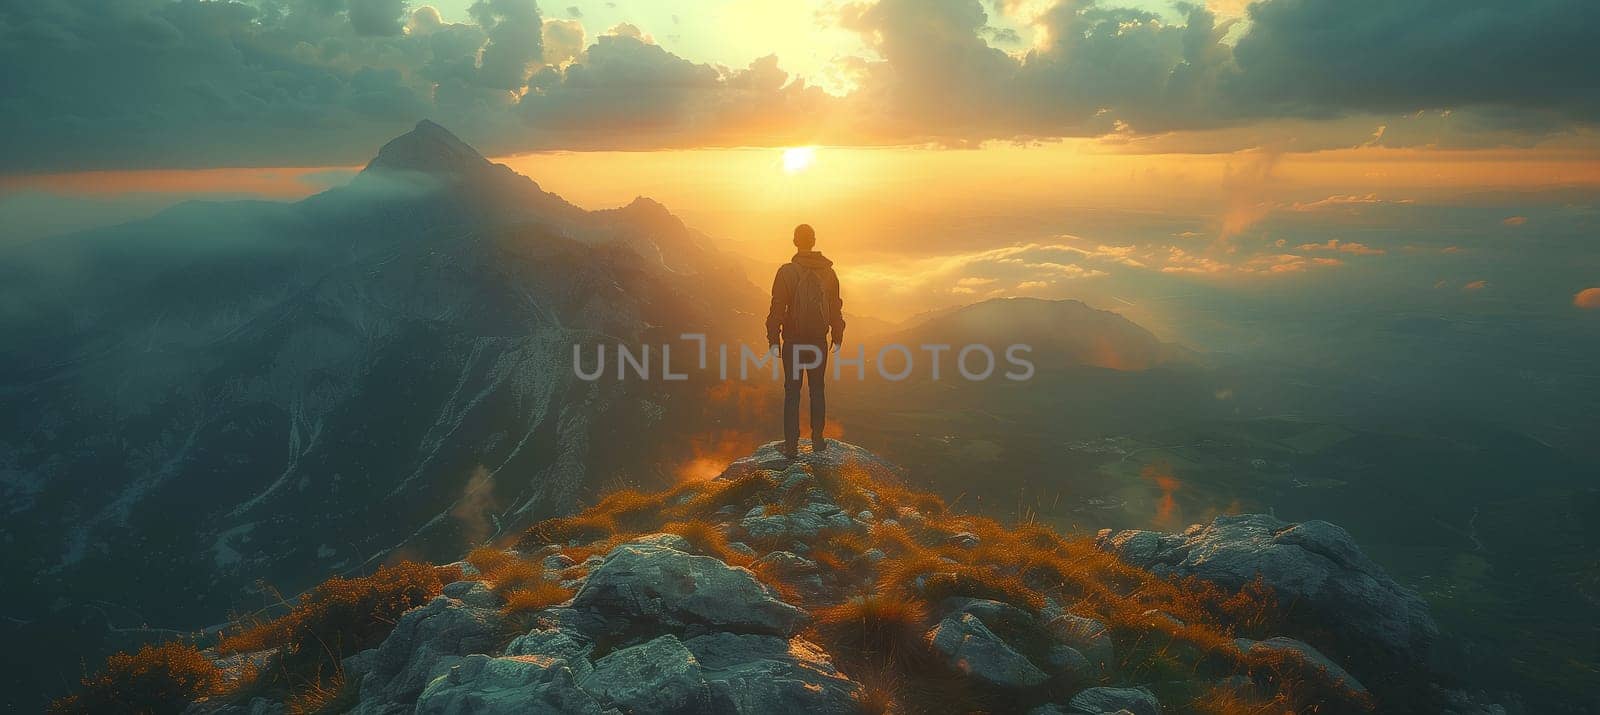 Man on mountaintop at sunset, cloudfilled sky, stunning natural landscape view by richwolf